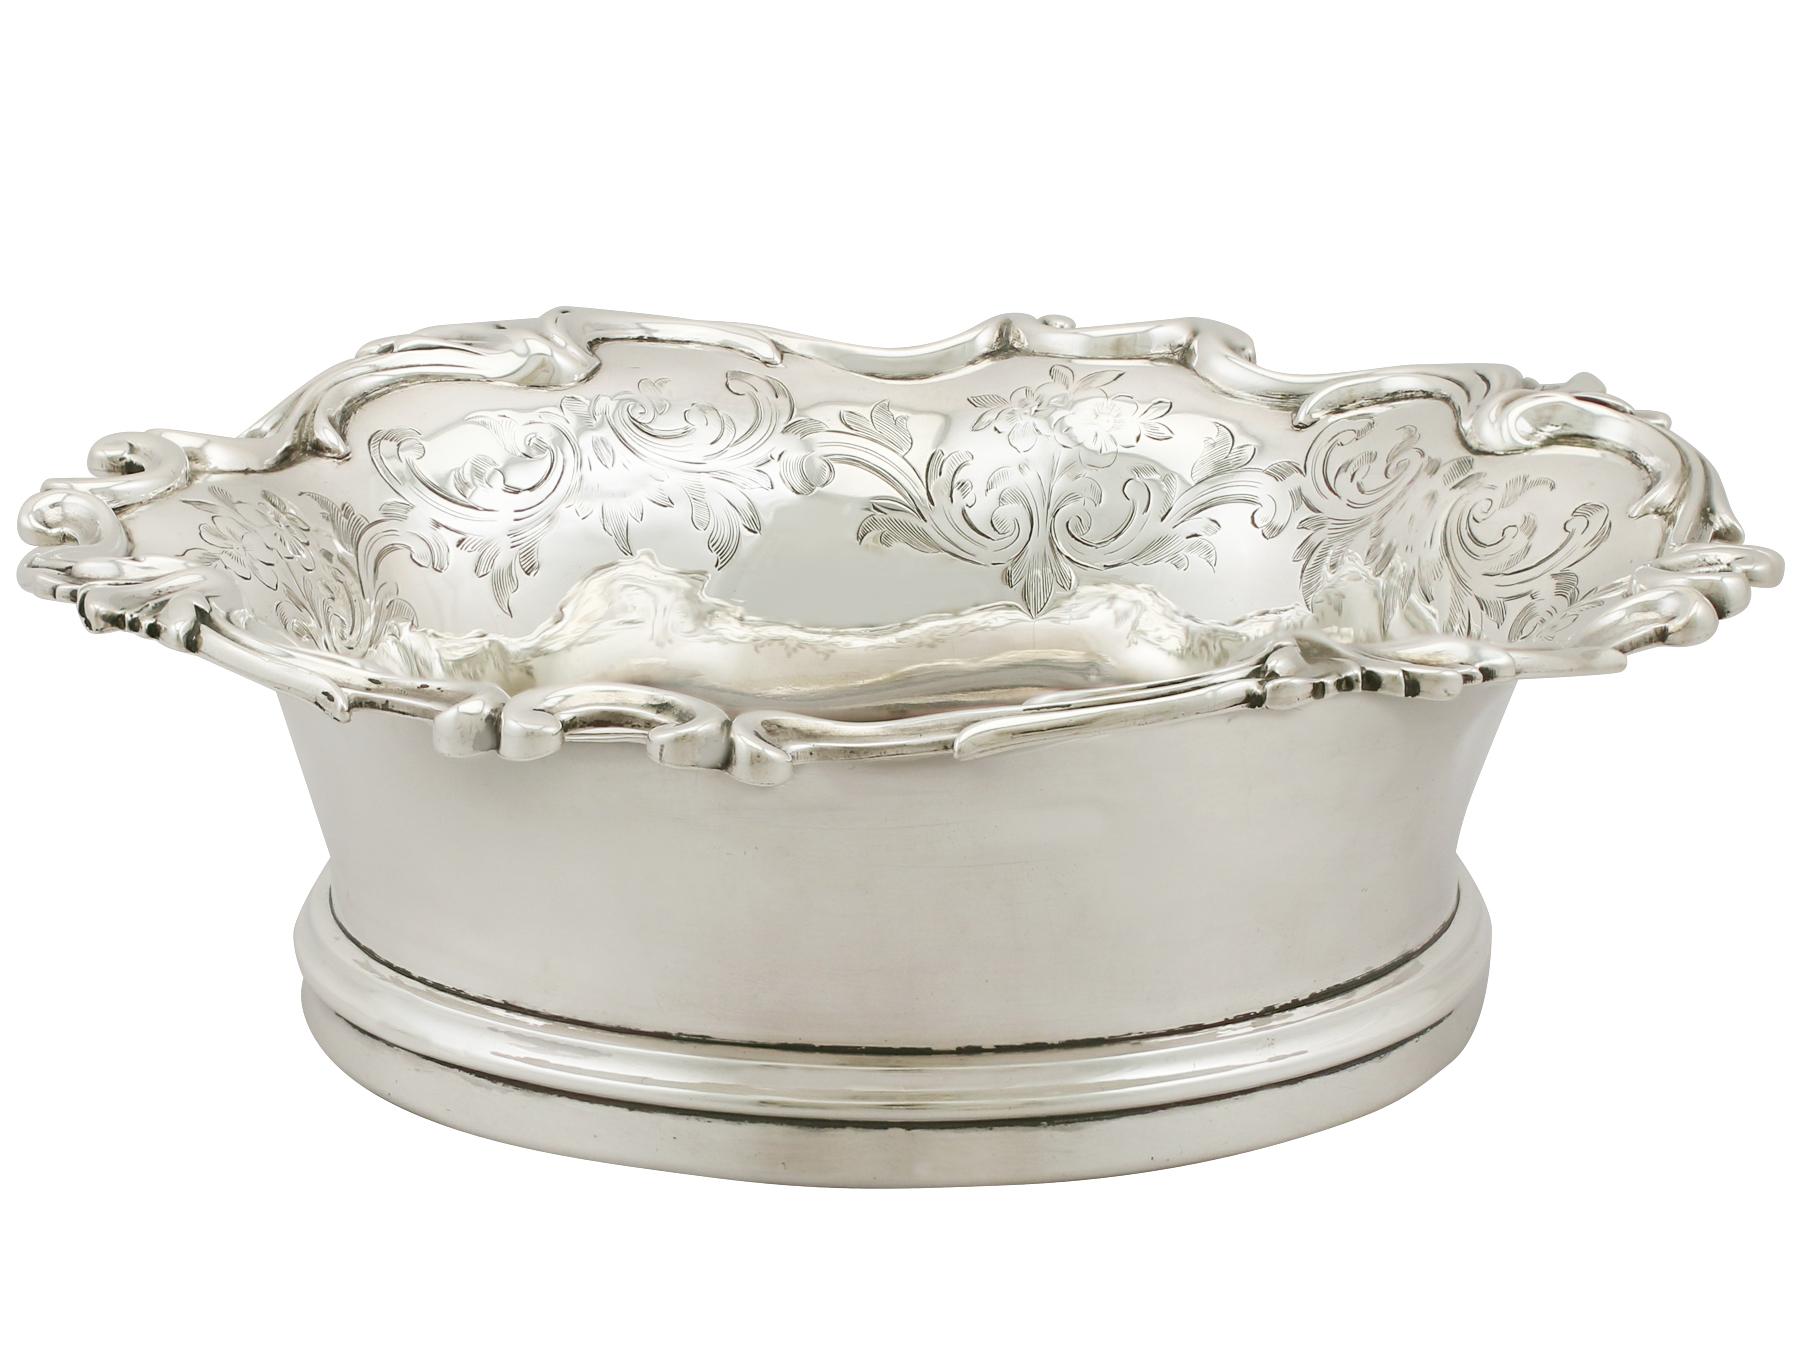 Mid-19th Century Antique Victorian English Sterling Silver Coasters by the Barnard Silversmiths